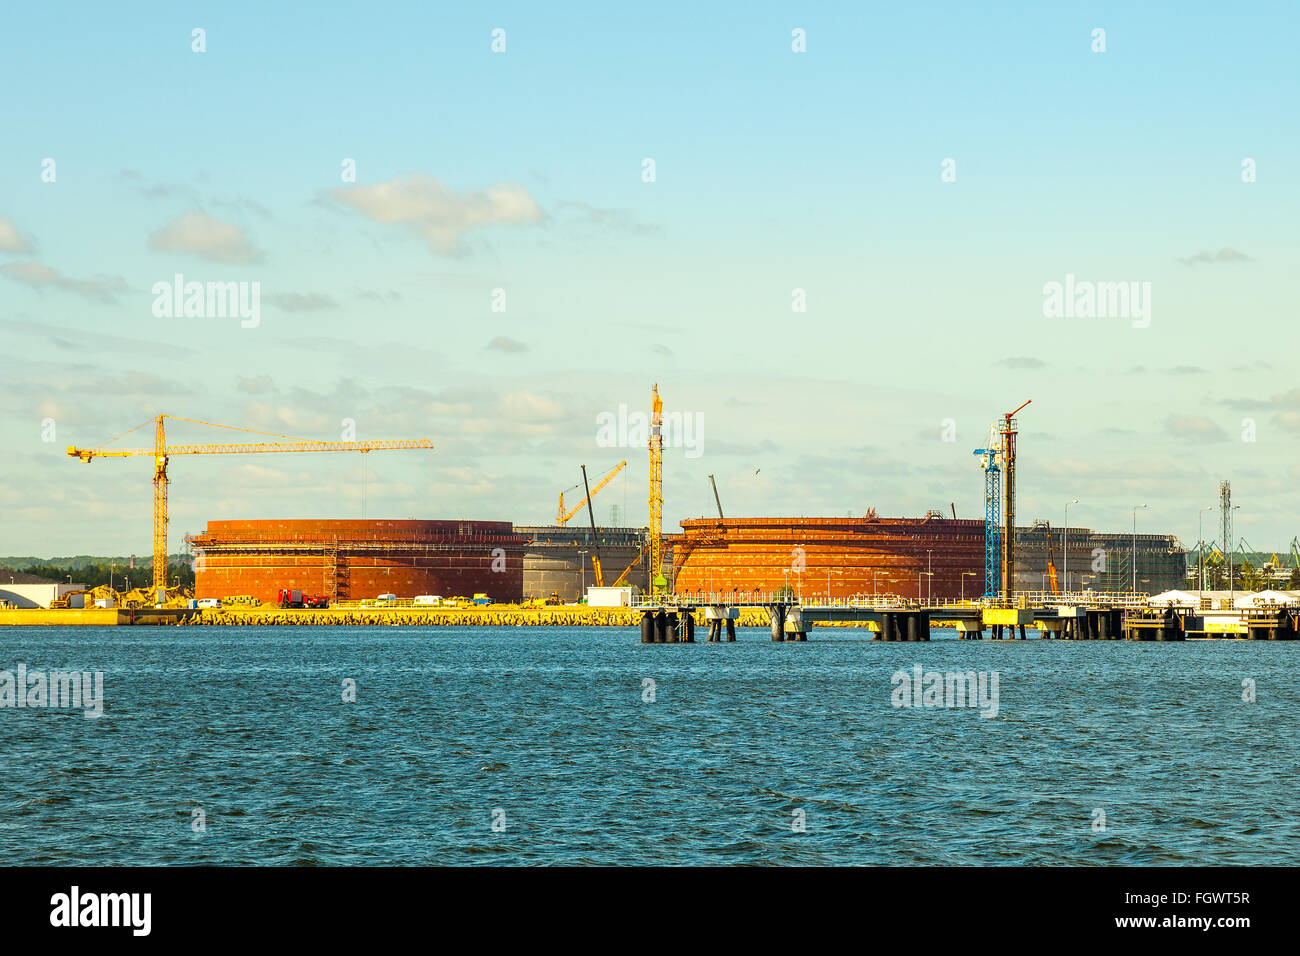 New oil storage tanks under construction in port of Gdansk, Poland. Stock Photo